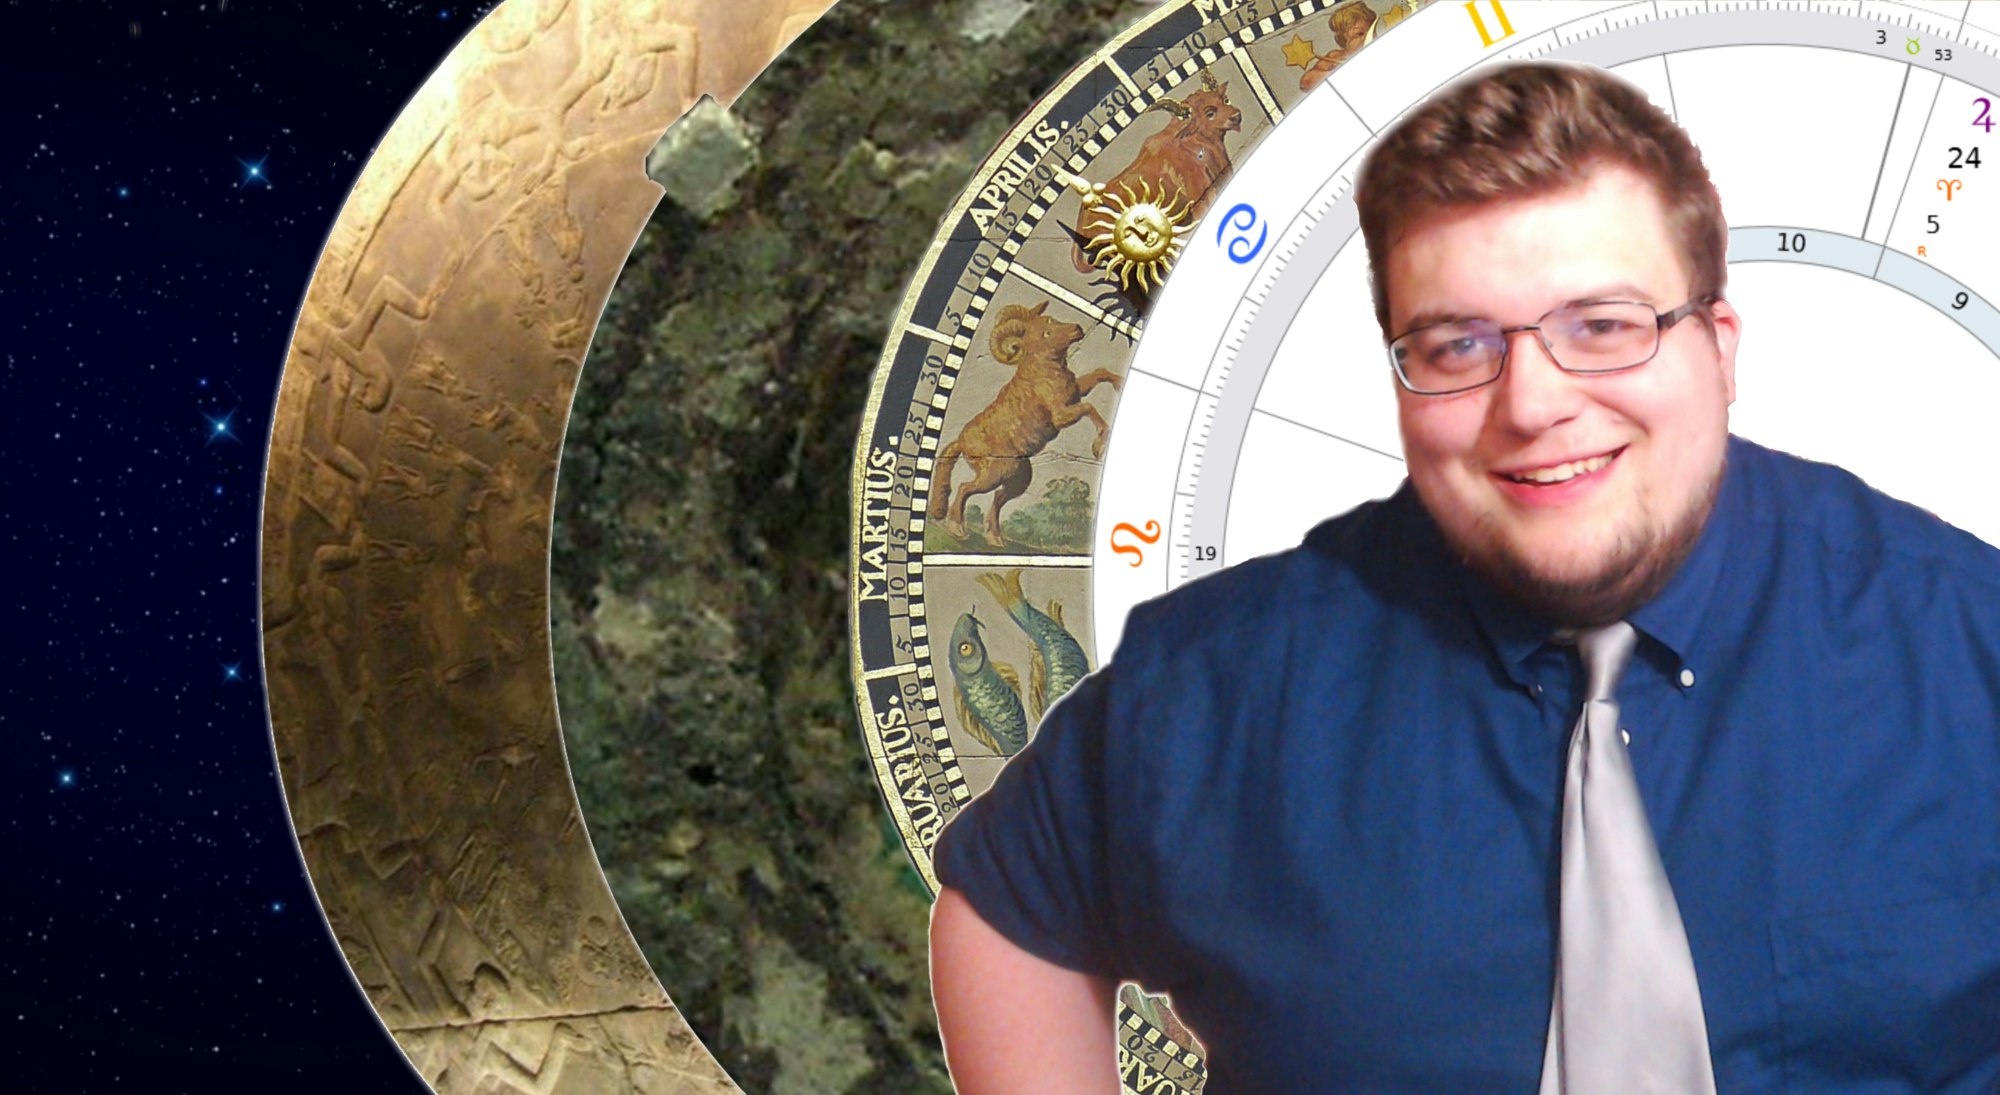 Photo of Patrick smiling with a close up of an astrology chart set as the background.